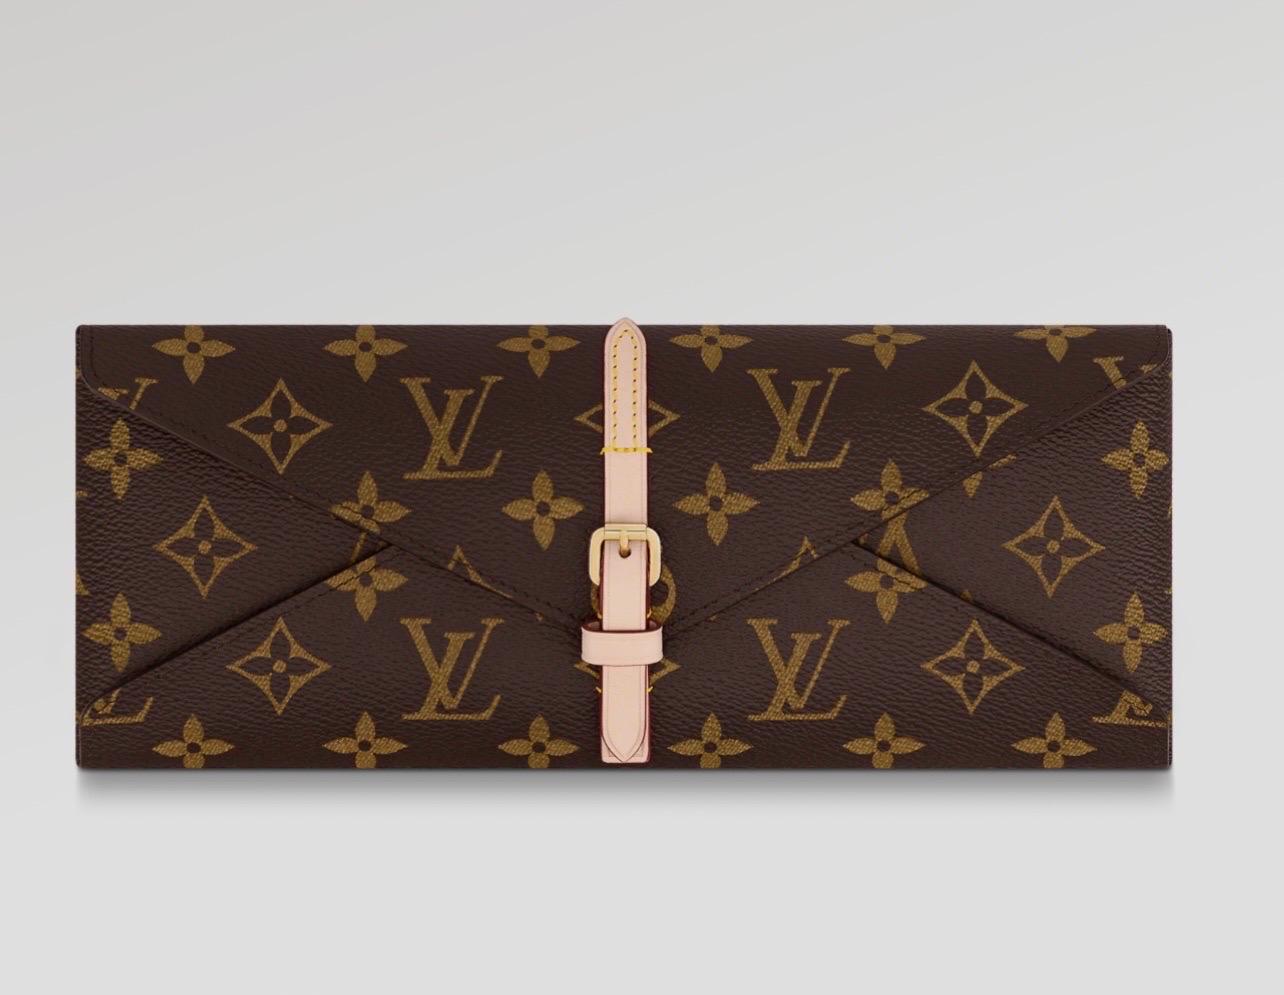 Rare set of Louis Vuitton chopsticks
Limited edition sold for the Chinese New Year
2 pairs of chopsticks & 2 stands
Comes with handy pouch
Dine in style with those amazing chopsticks

Practicality meets superior craftsmanship in this Chopsticks Set.